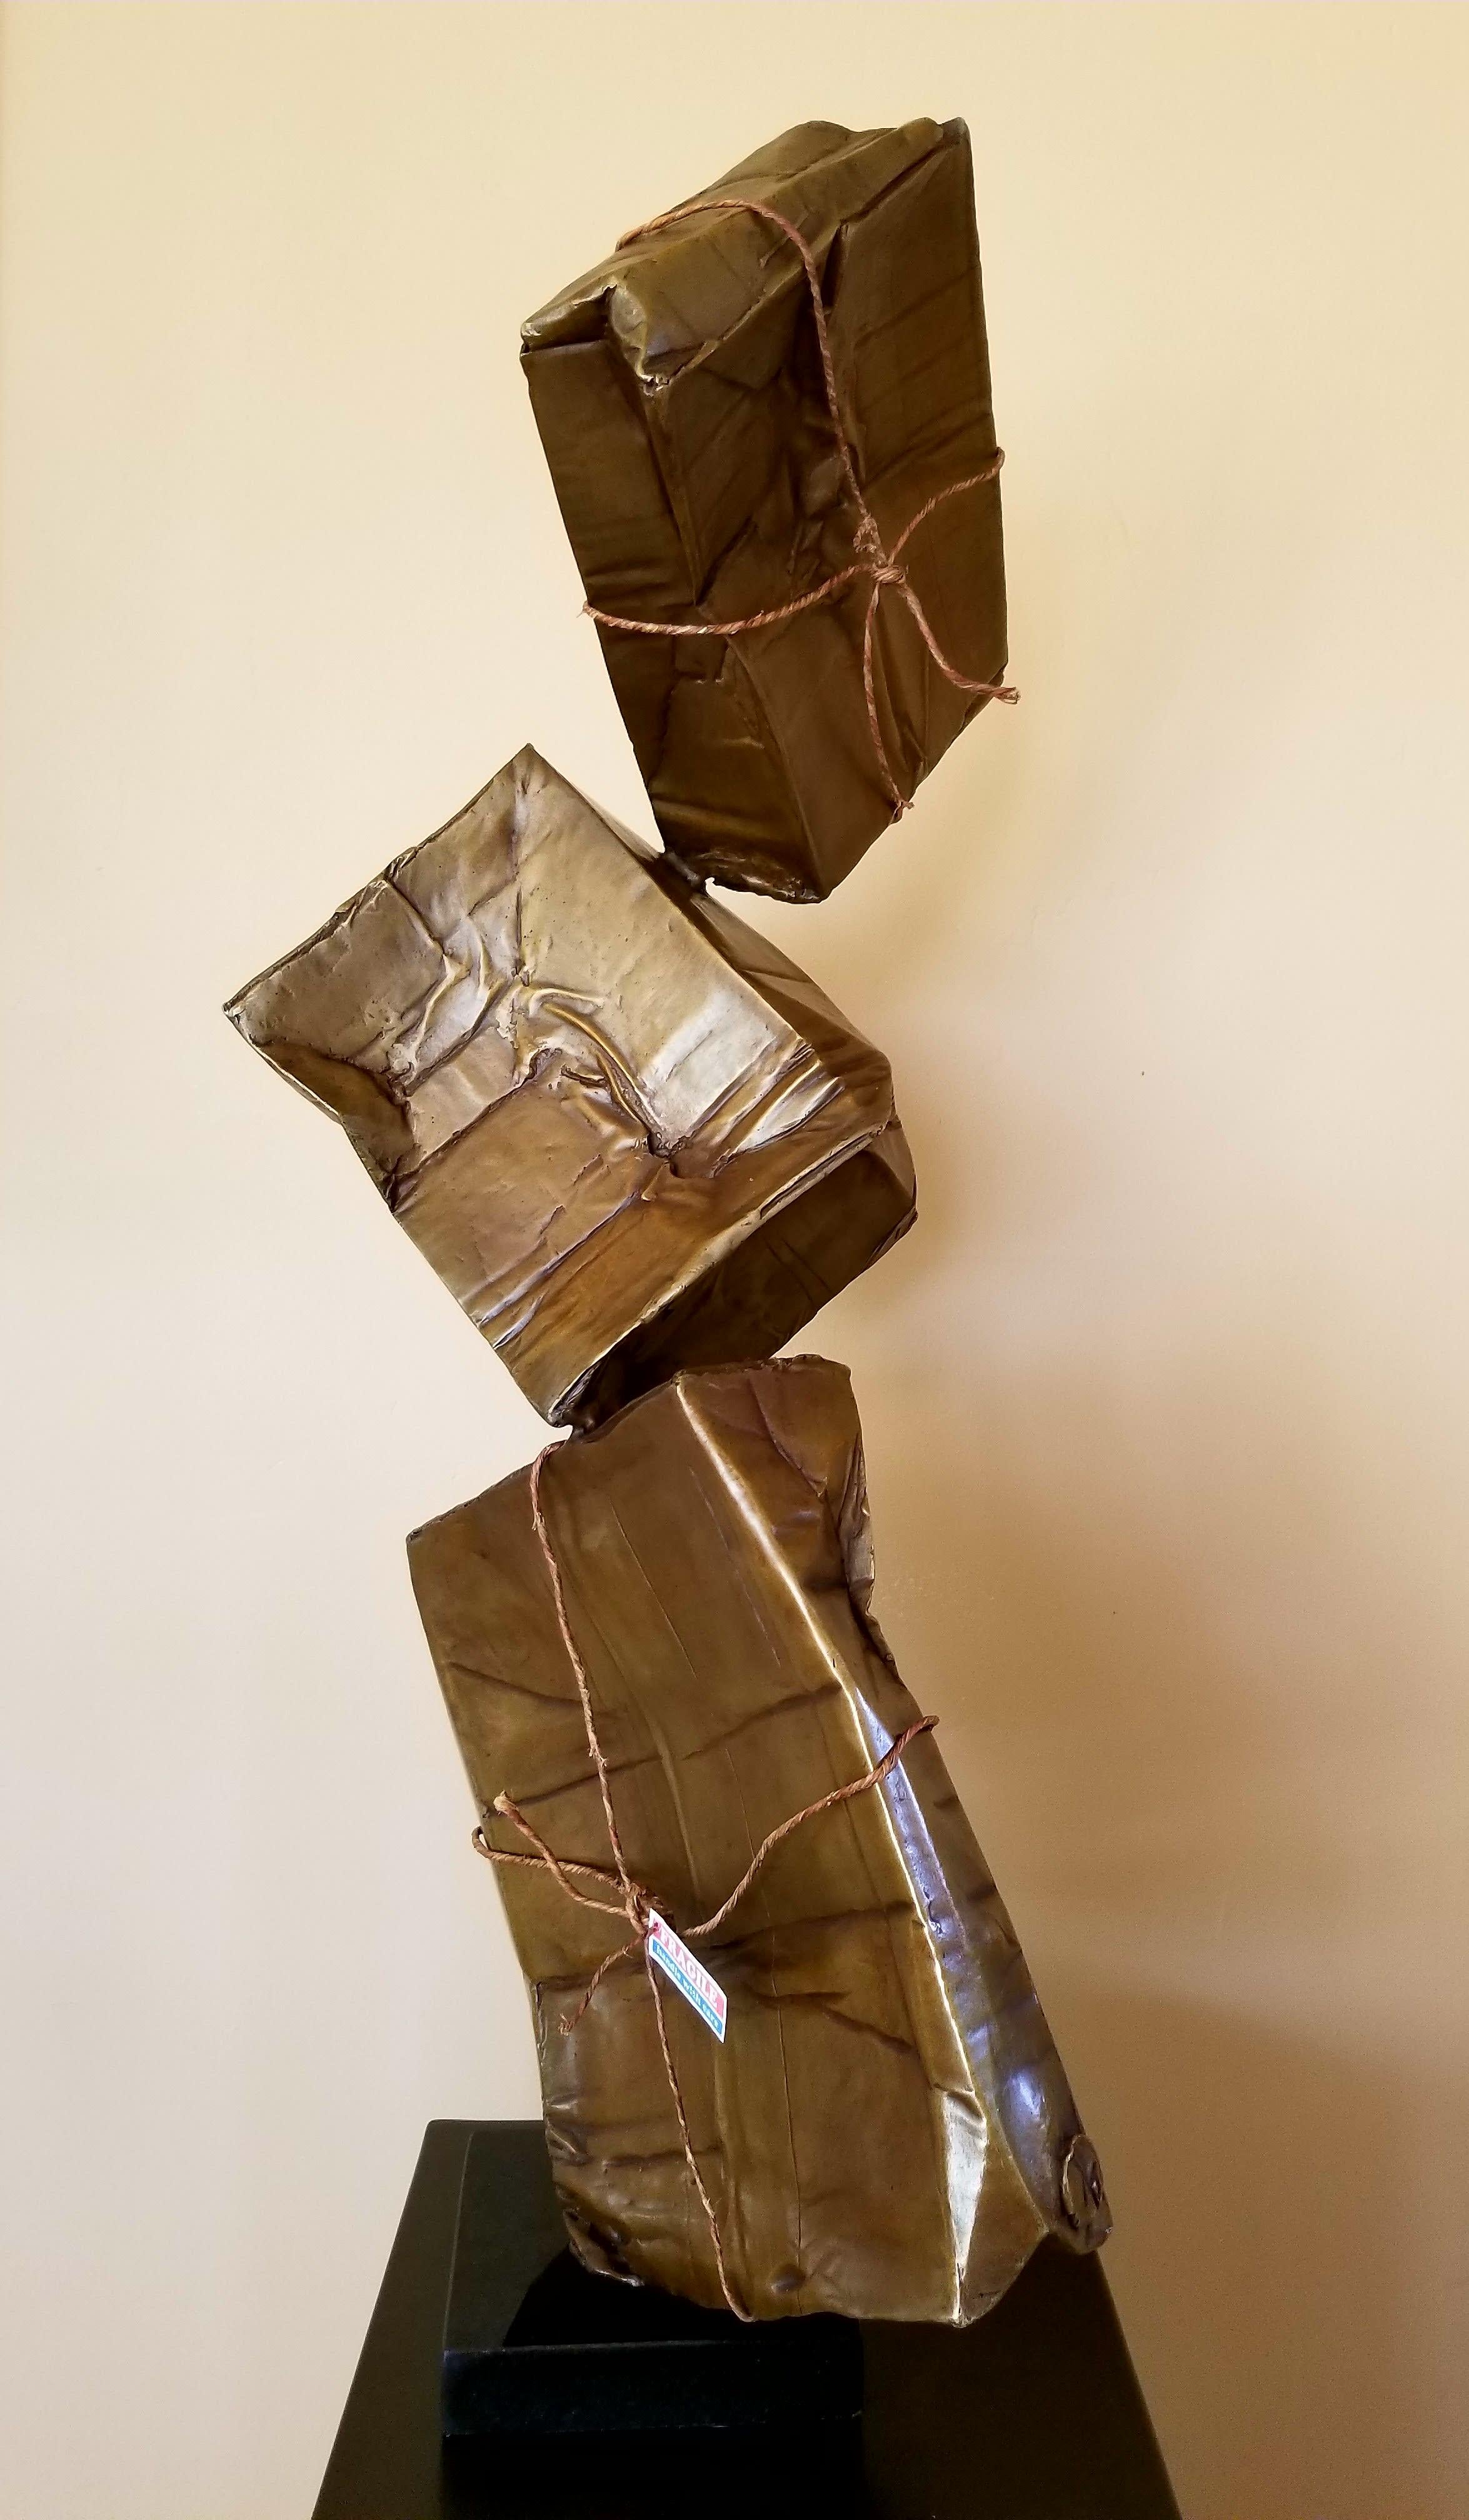 Priority - Special Handling #2 - Sculpture by Maidy Morhous